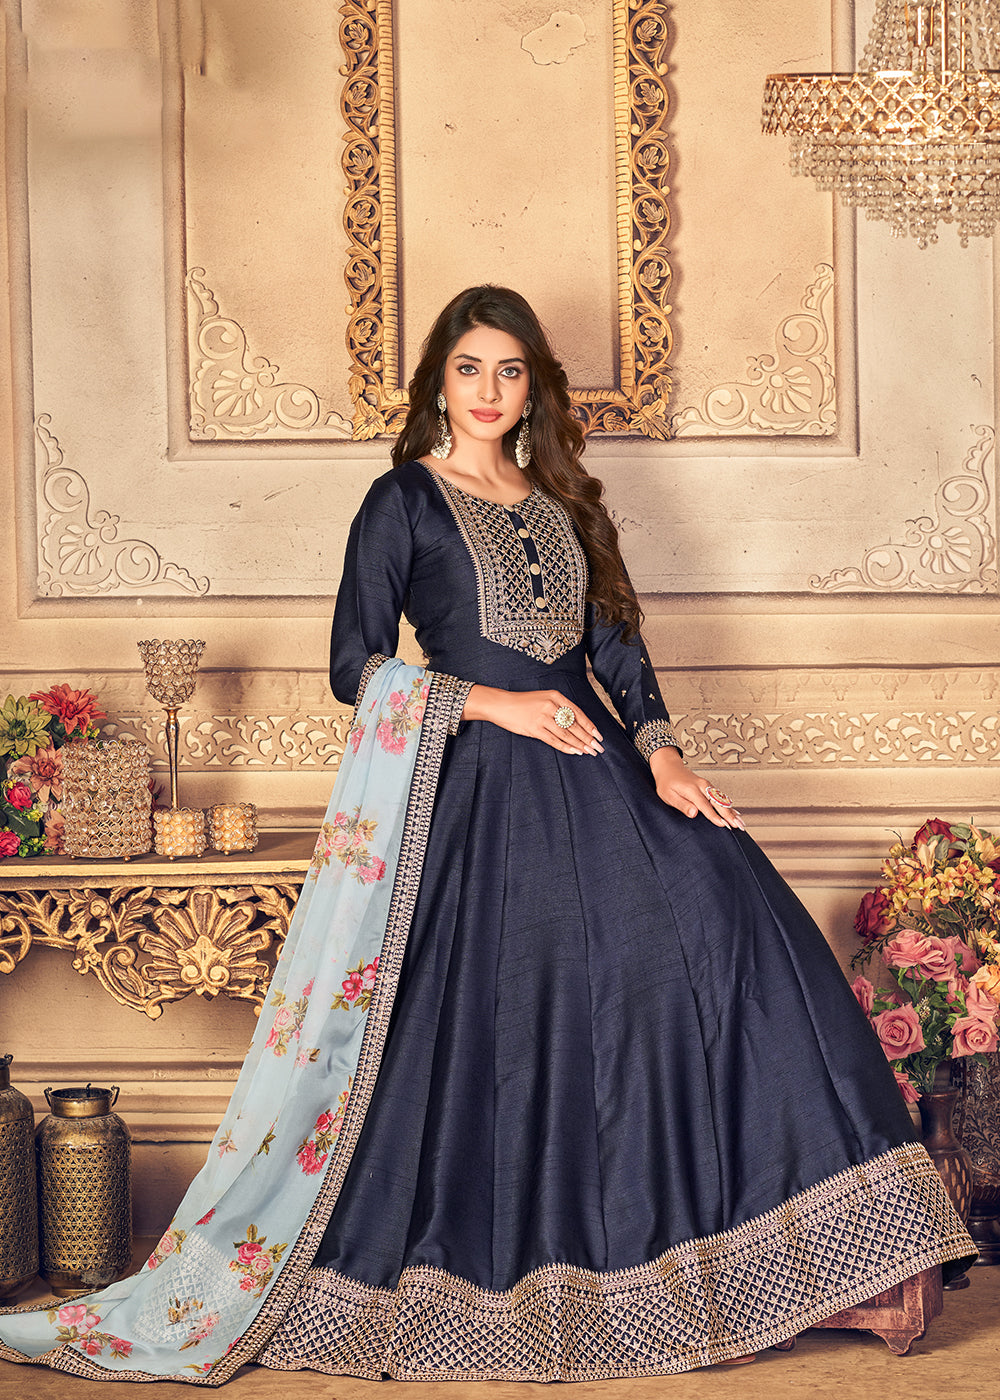 Buy Now Navy Blue Silk Beautifully Embroidered Floor Length Anarkali Suit Online in Canada at Empress Clothing.